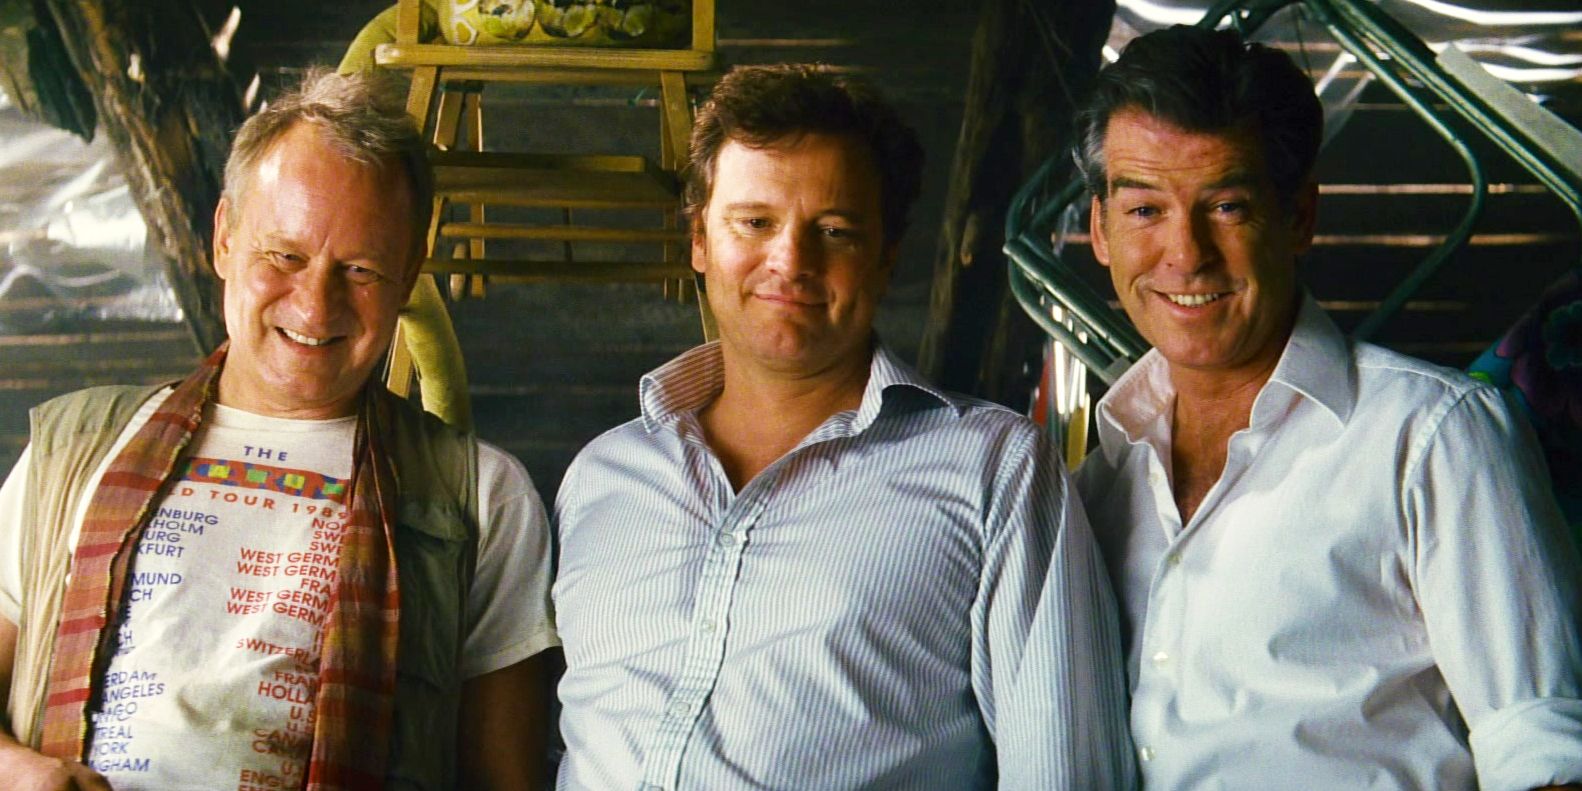 Sam, Harry, and Bill looking down and smiling in Mamma Mia!